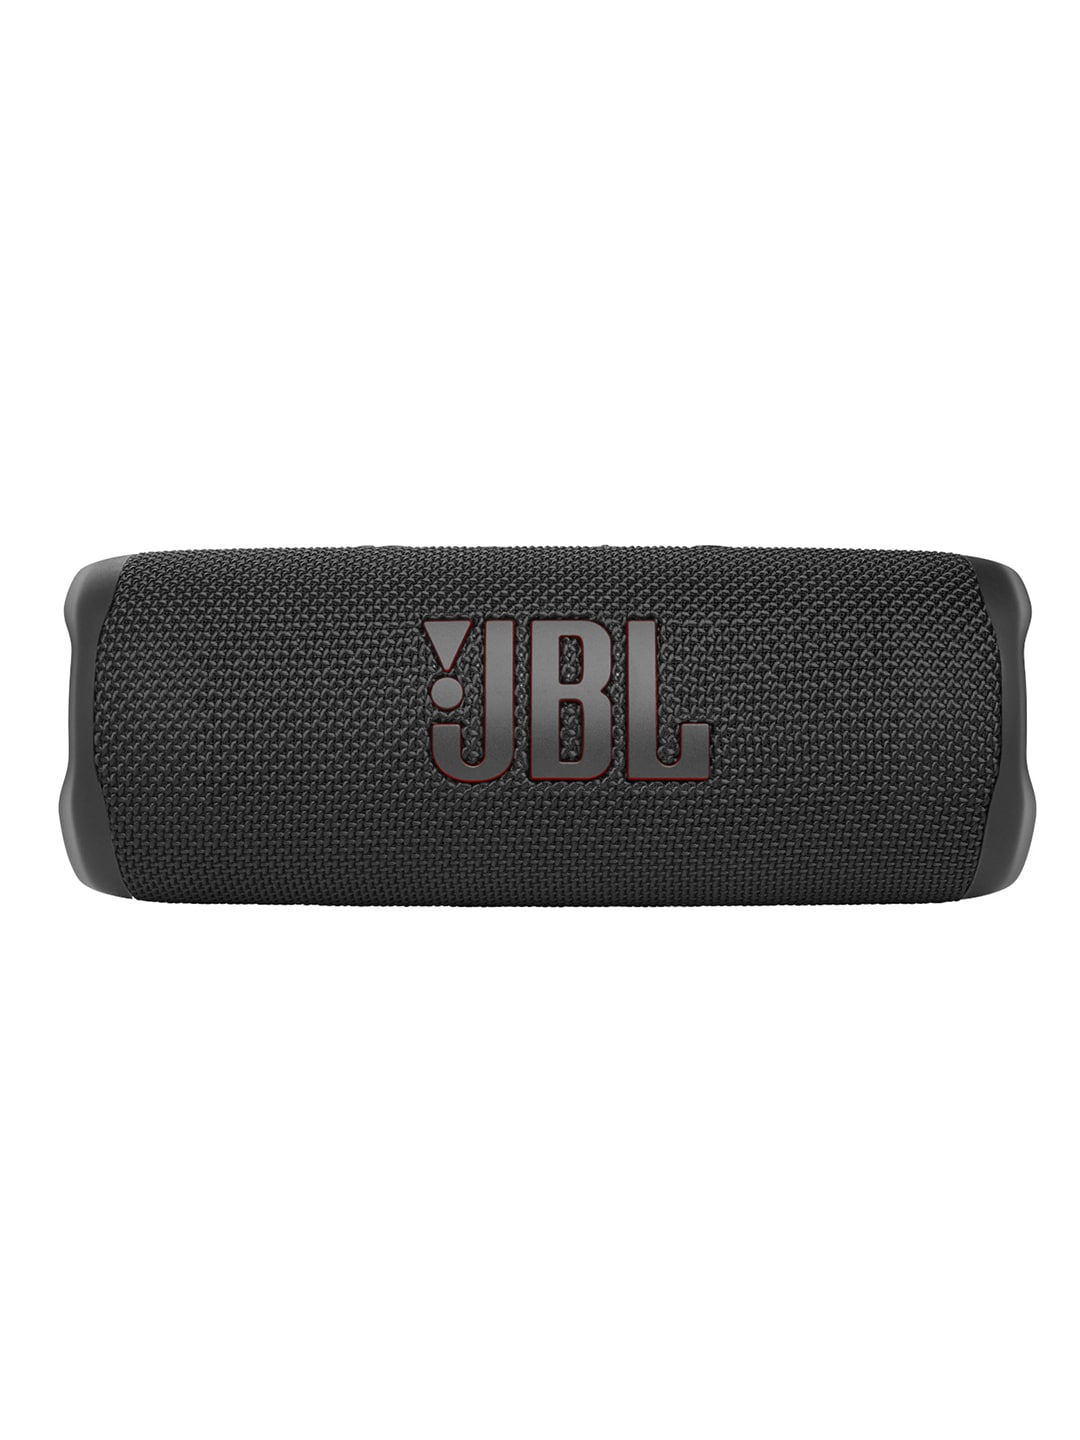 JBL Black Flip 6 Wireless Portable Bluetooth Speaker Without Mic Price in India